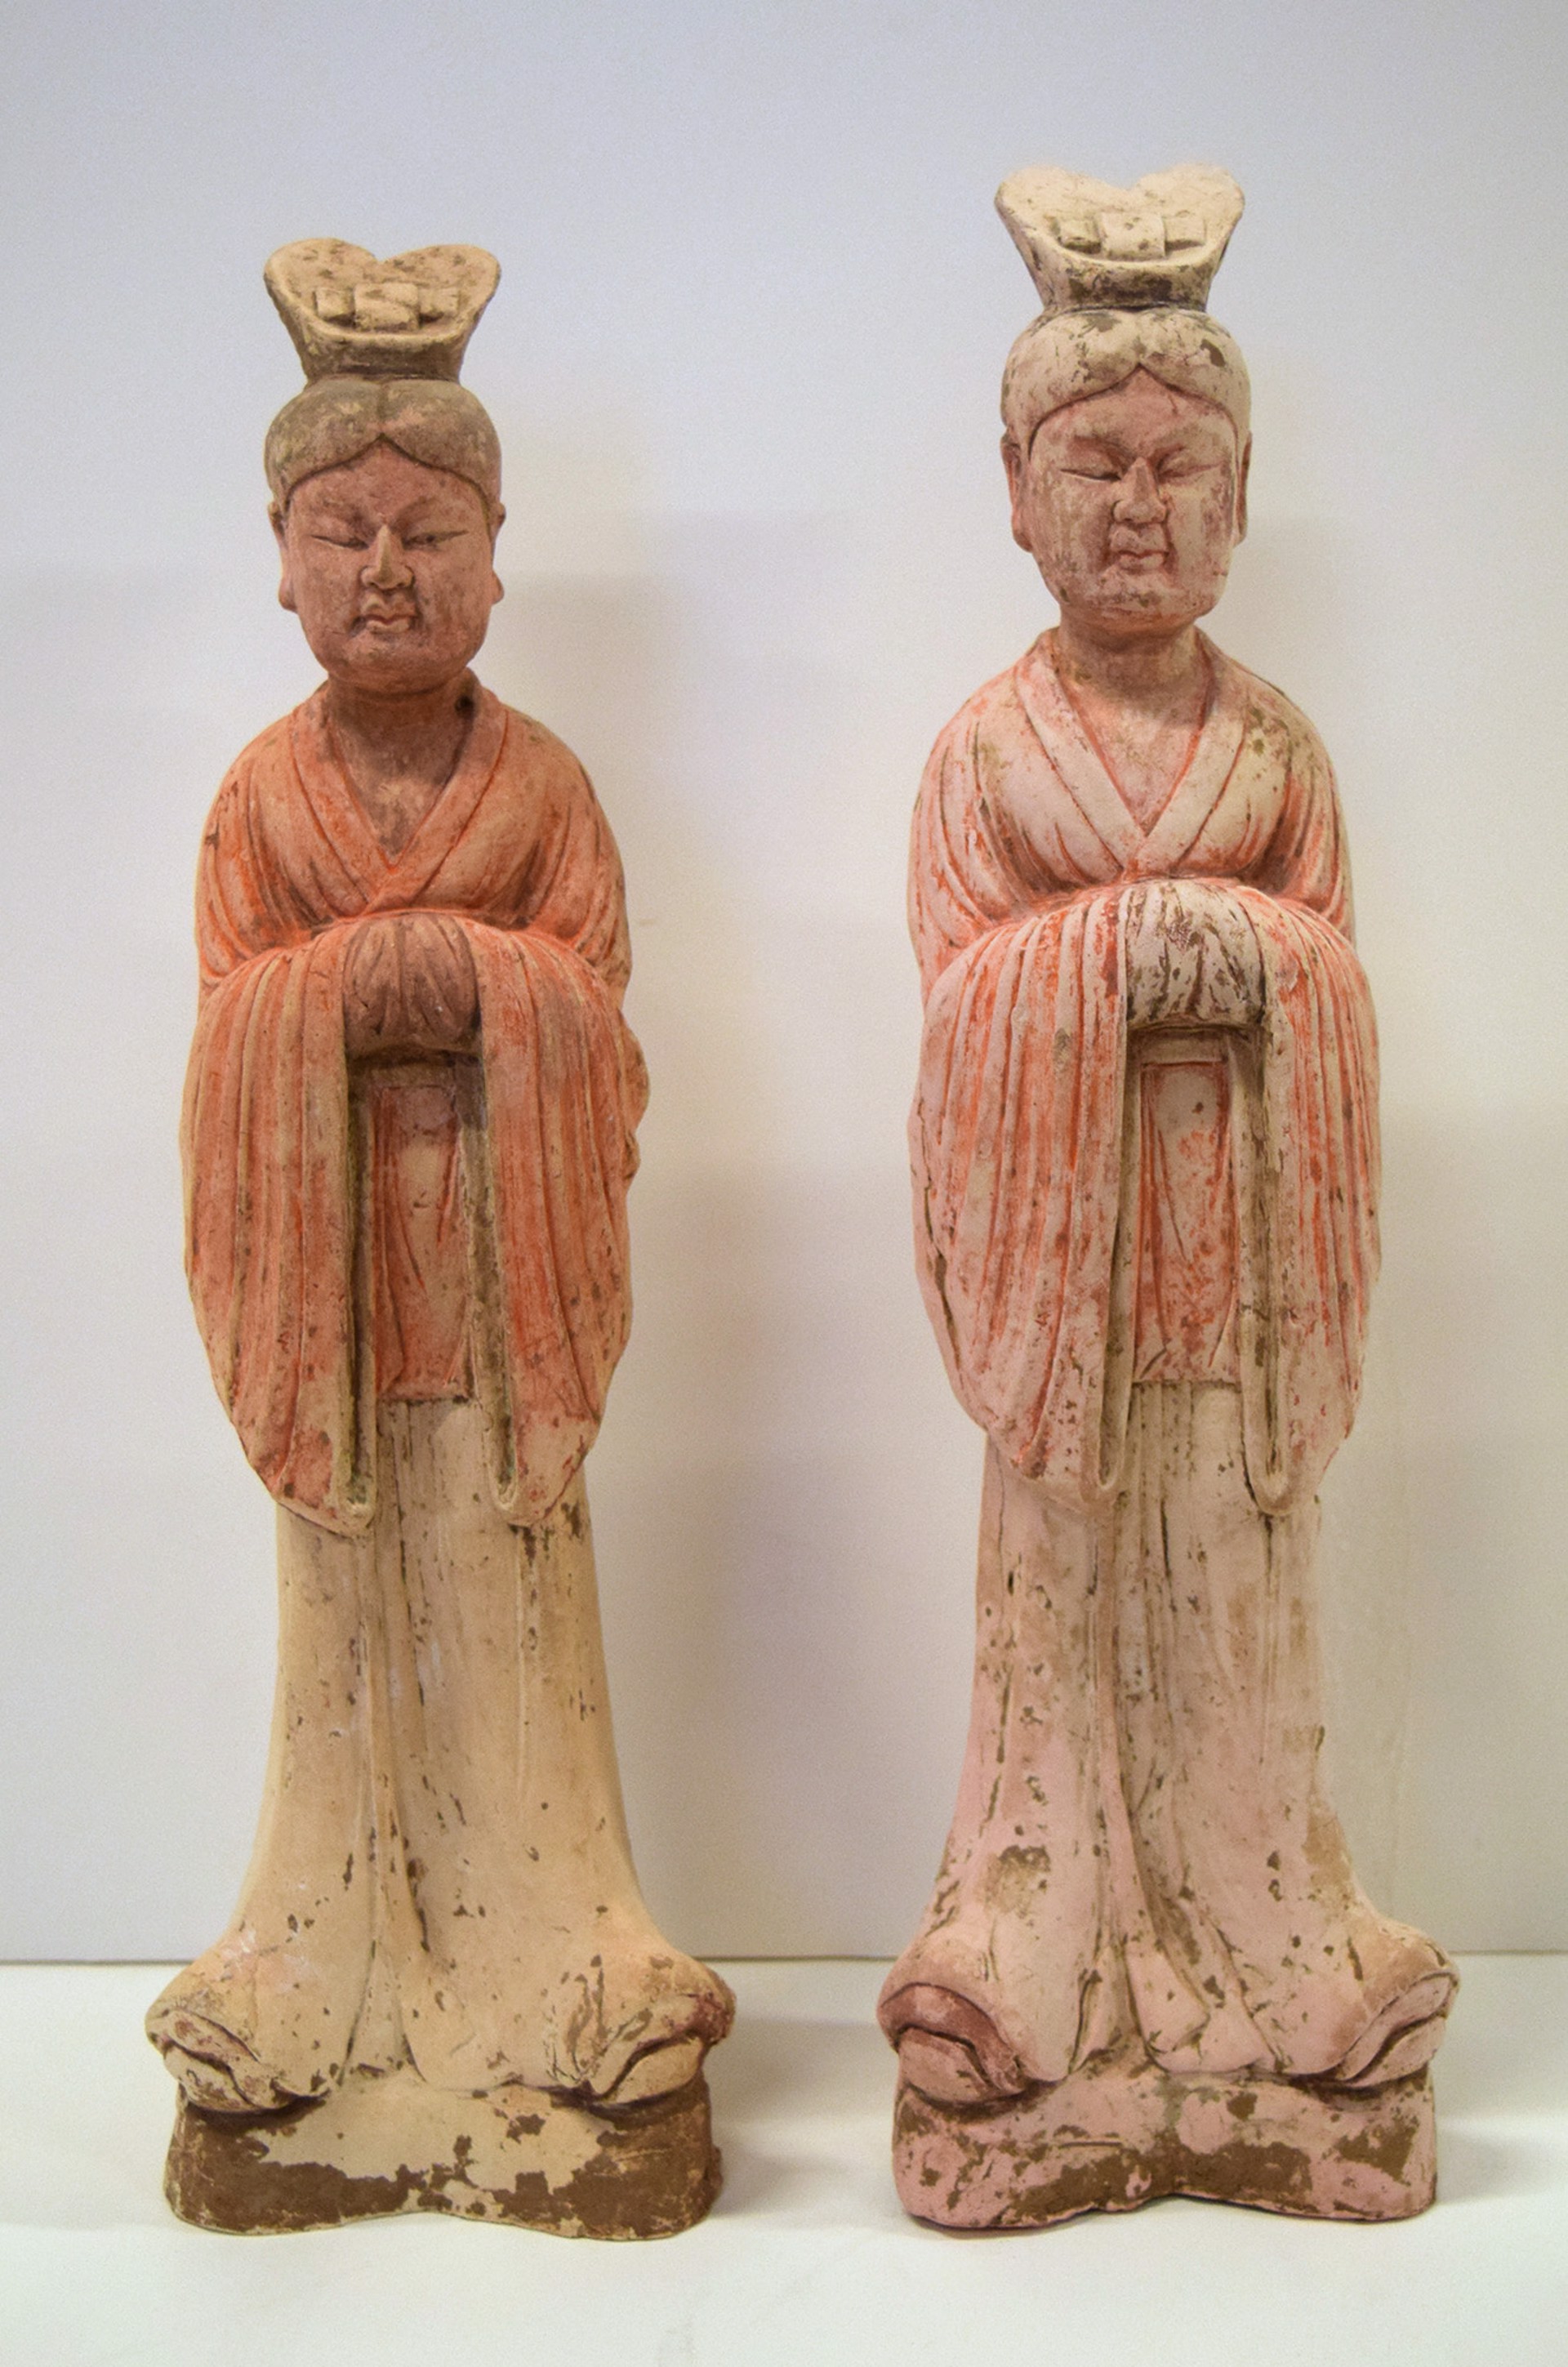 PAIR OF PAINTED POTTERY FIGURES OF COURT OFFICIALS